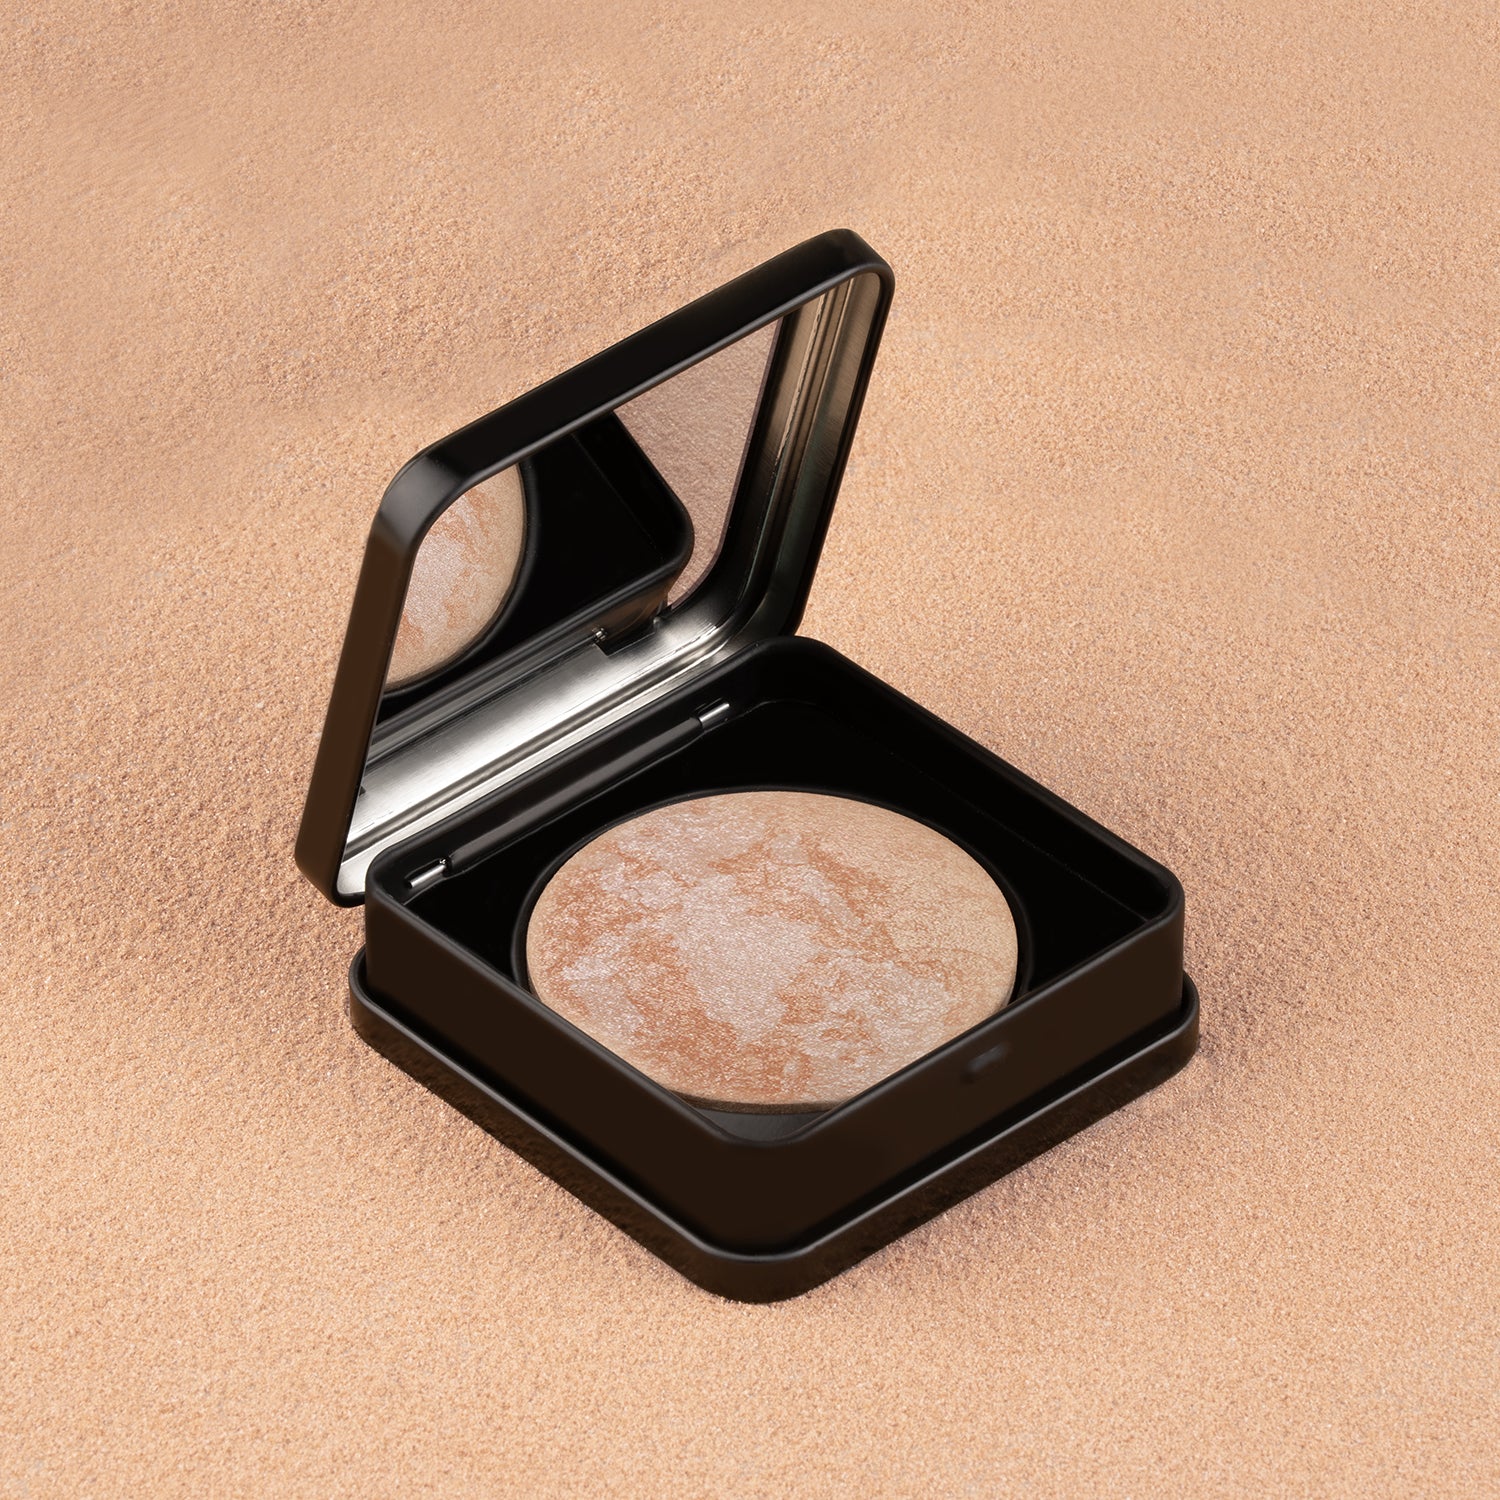 PAC Cosmetics Baked Highlighter #Size_7.5 gm+#Color_Iconic